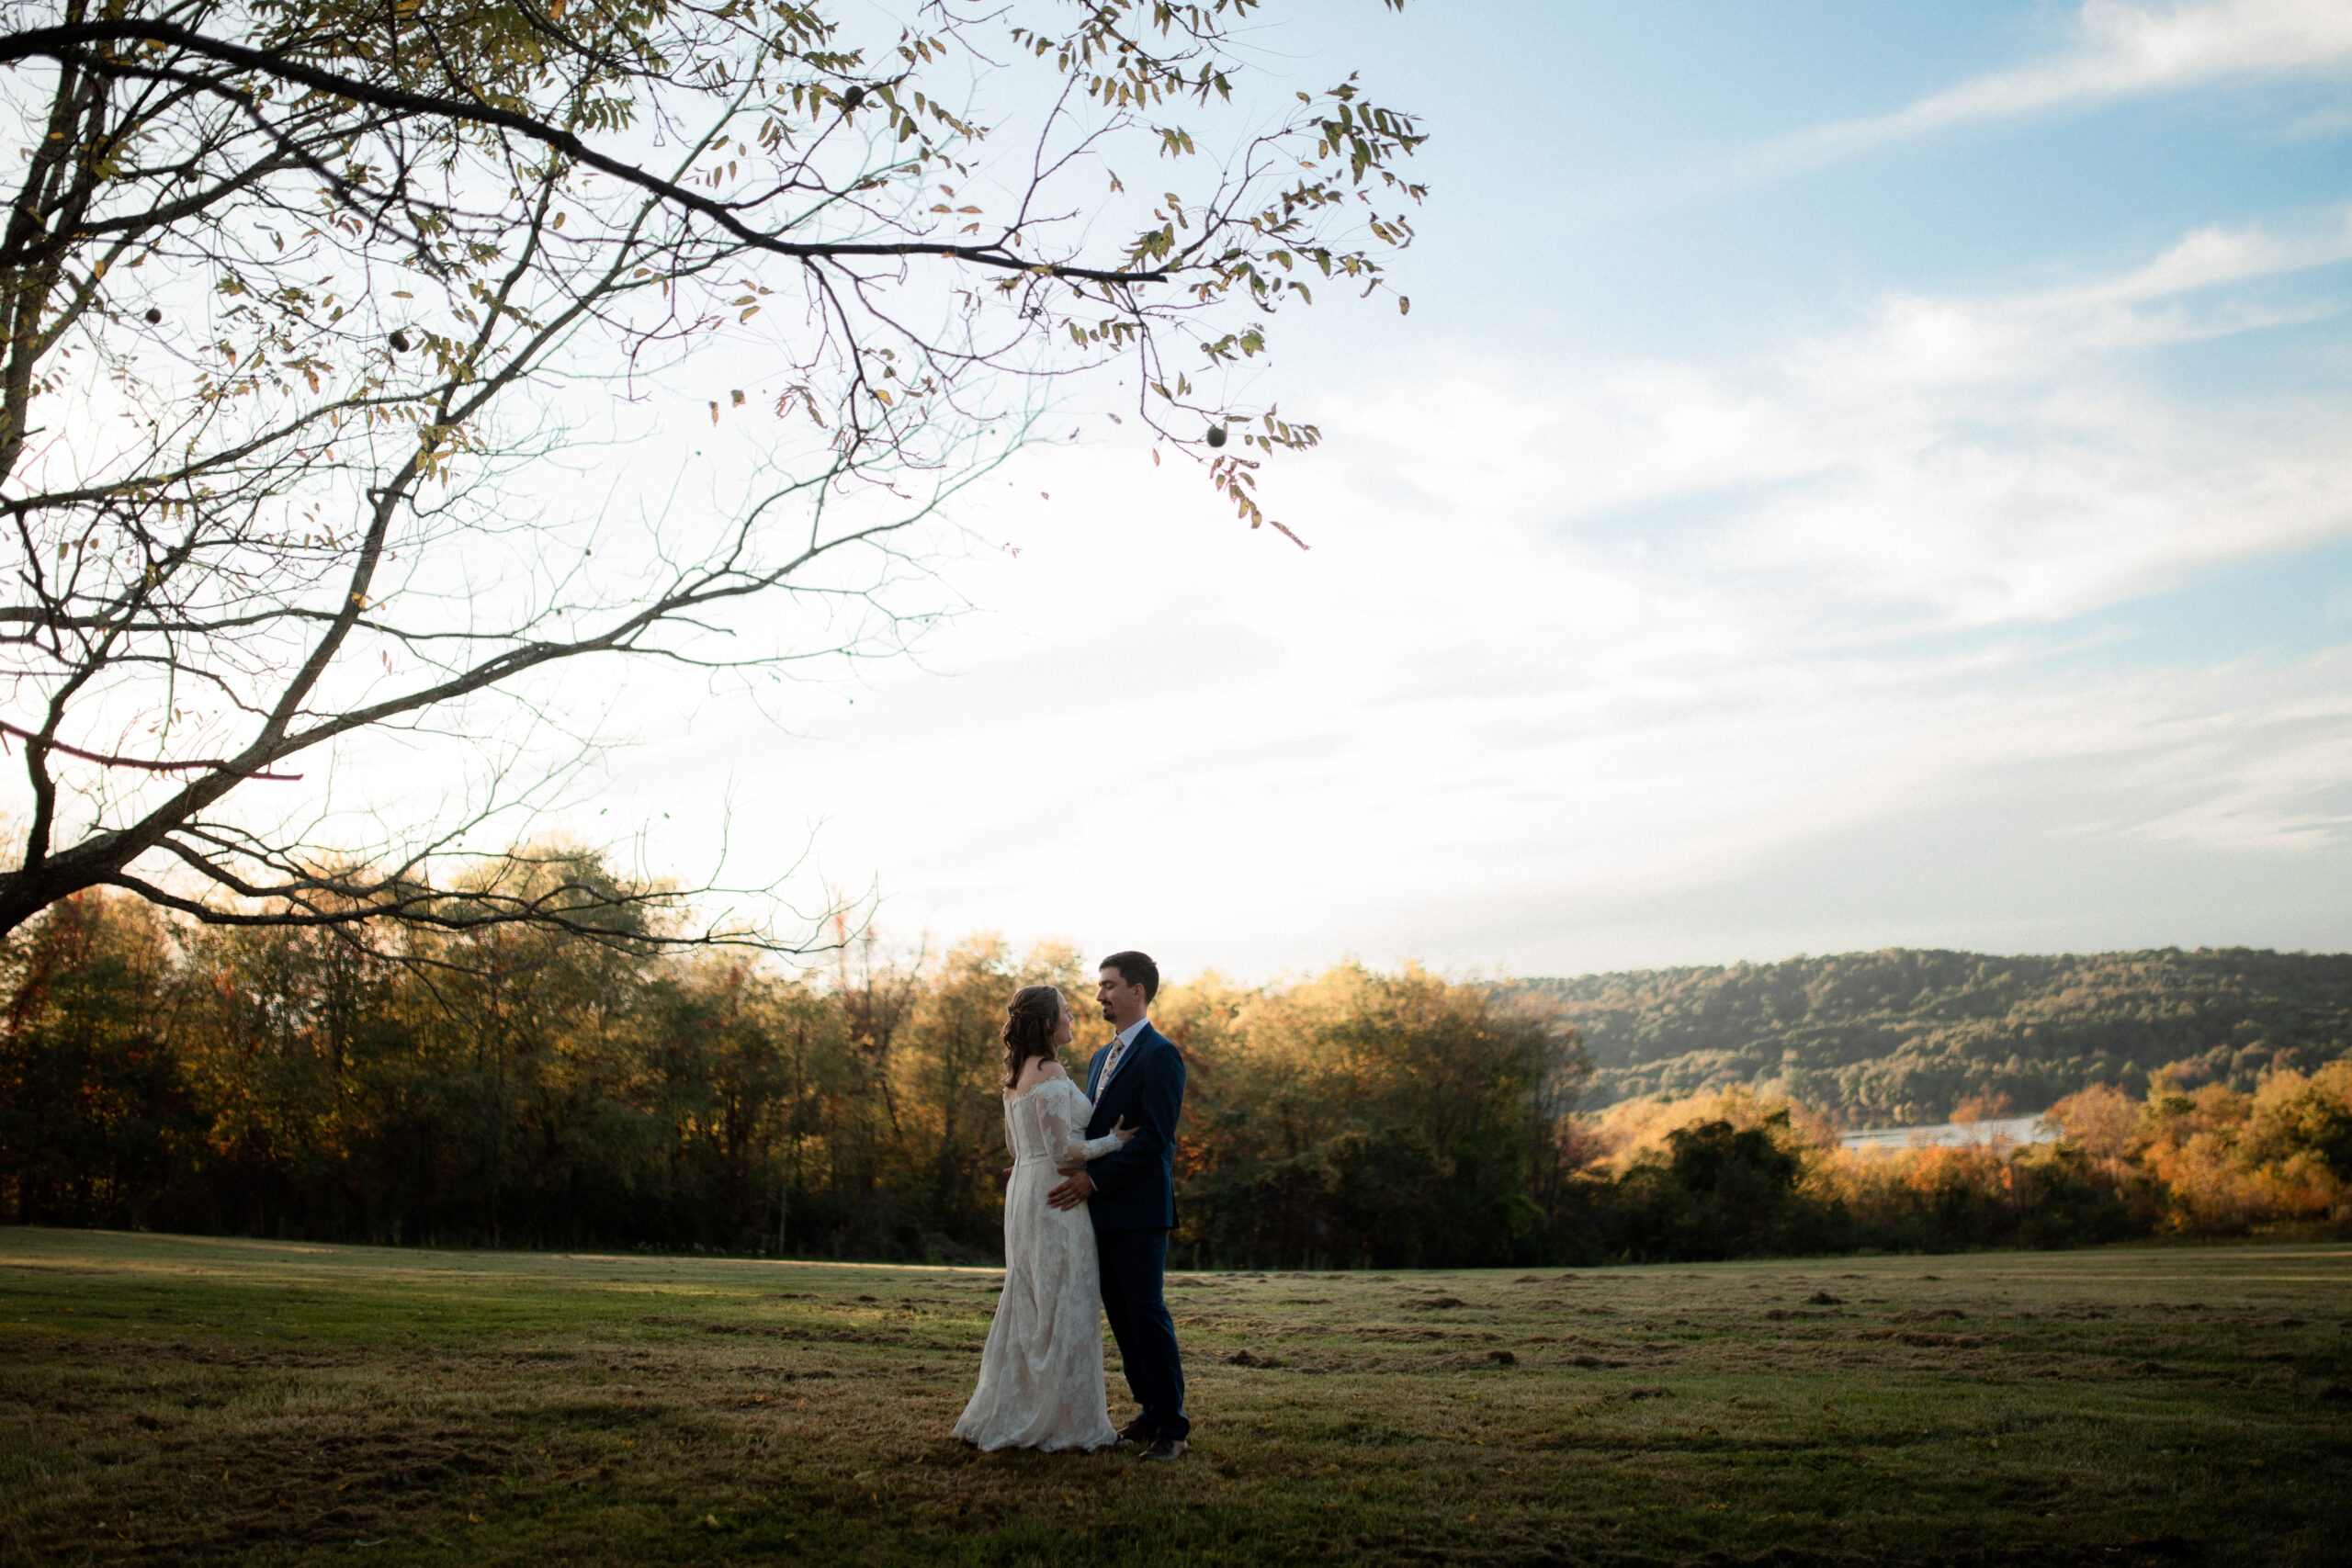 Pennsylvania Meets Louisiana in this Elevated Fall Wedding